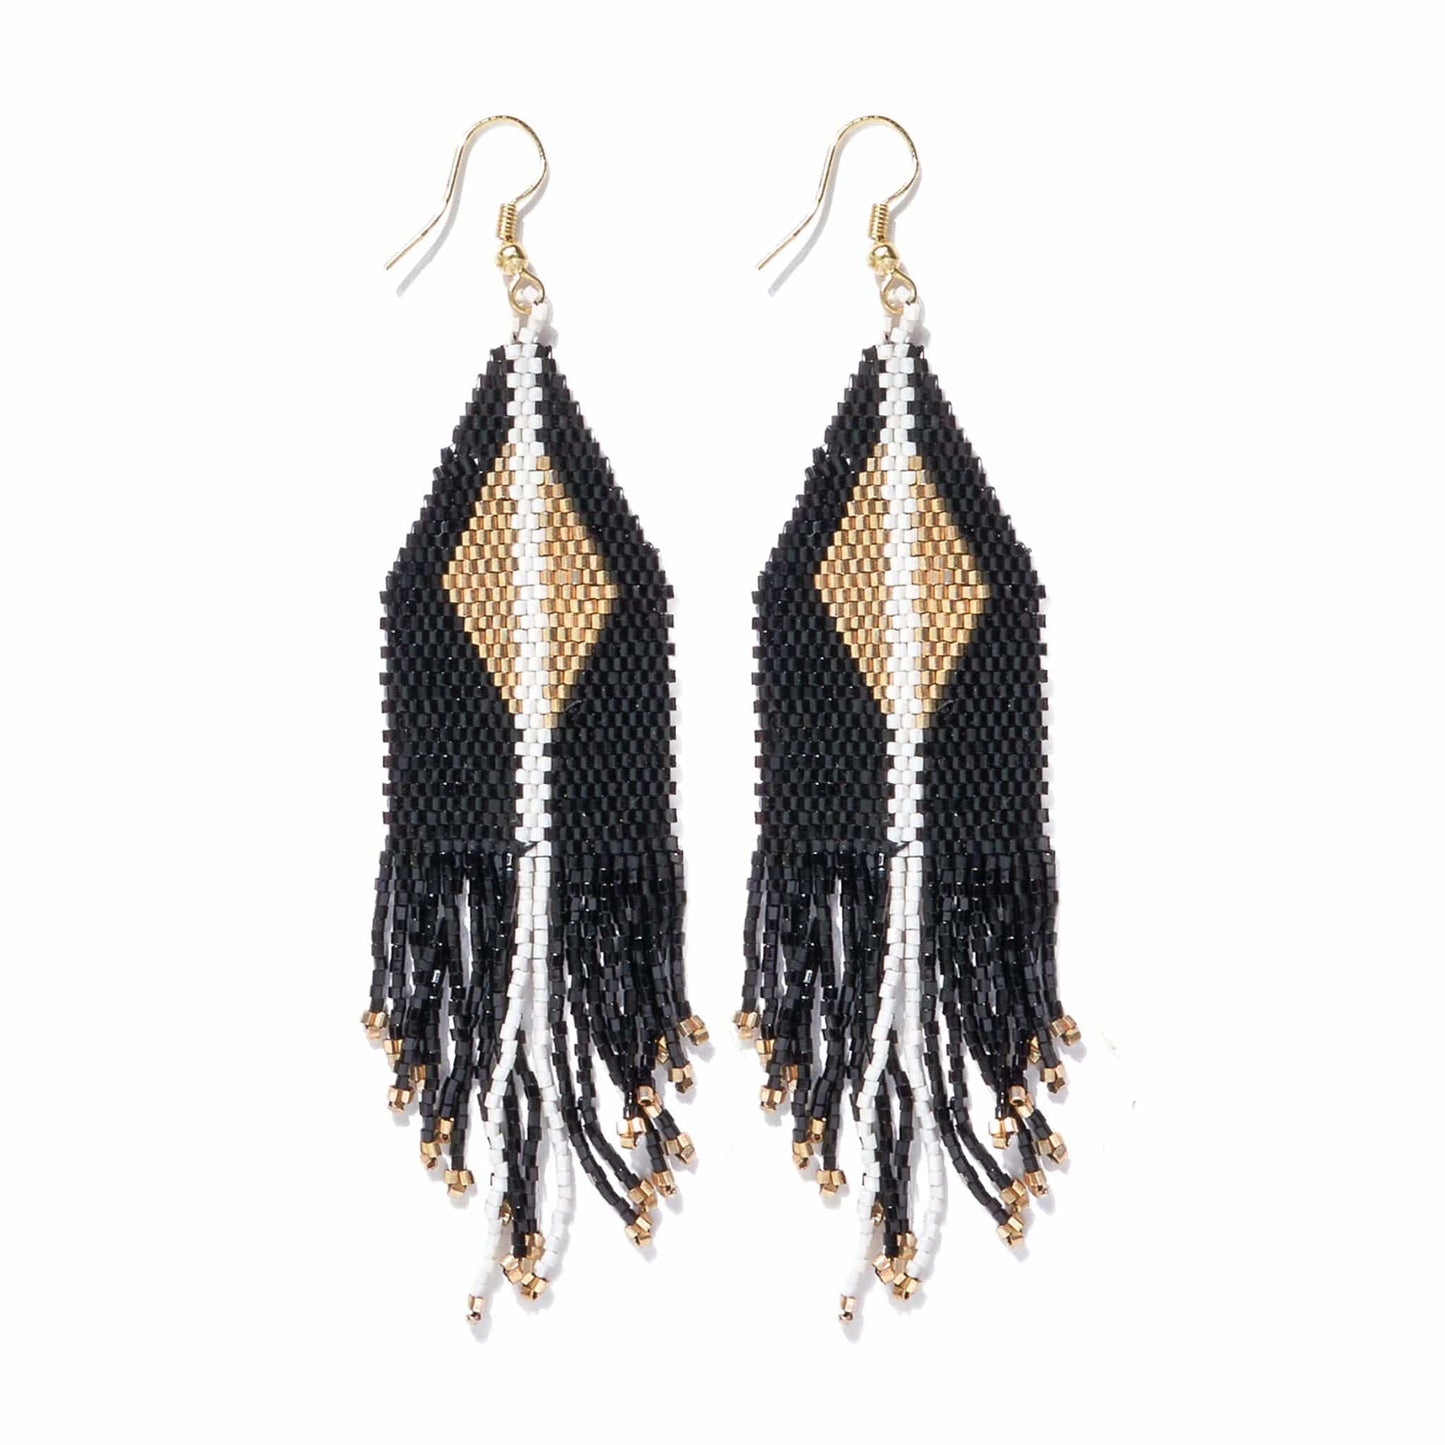 Black With Gold Luxe Diamond With Fringe Earrings earring